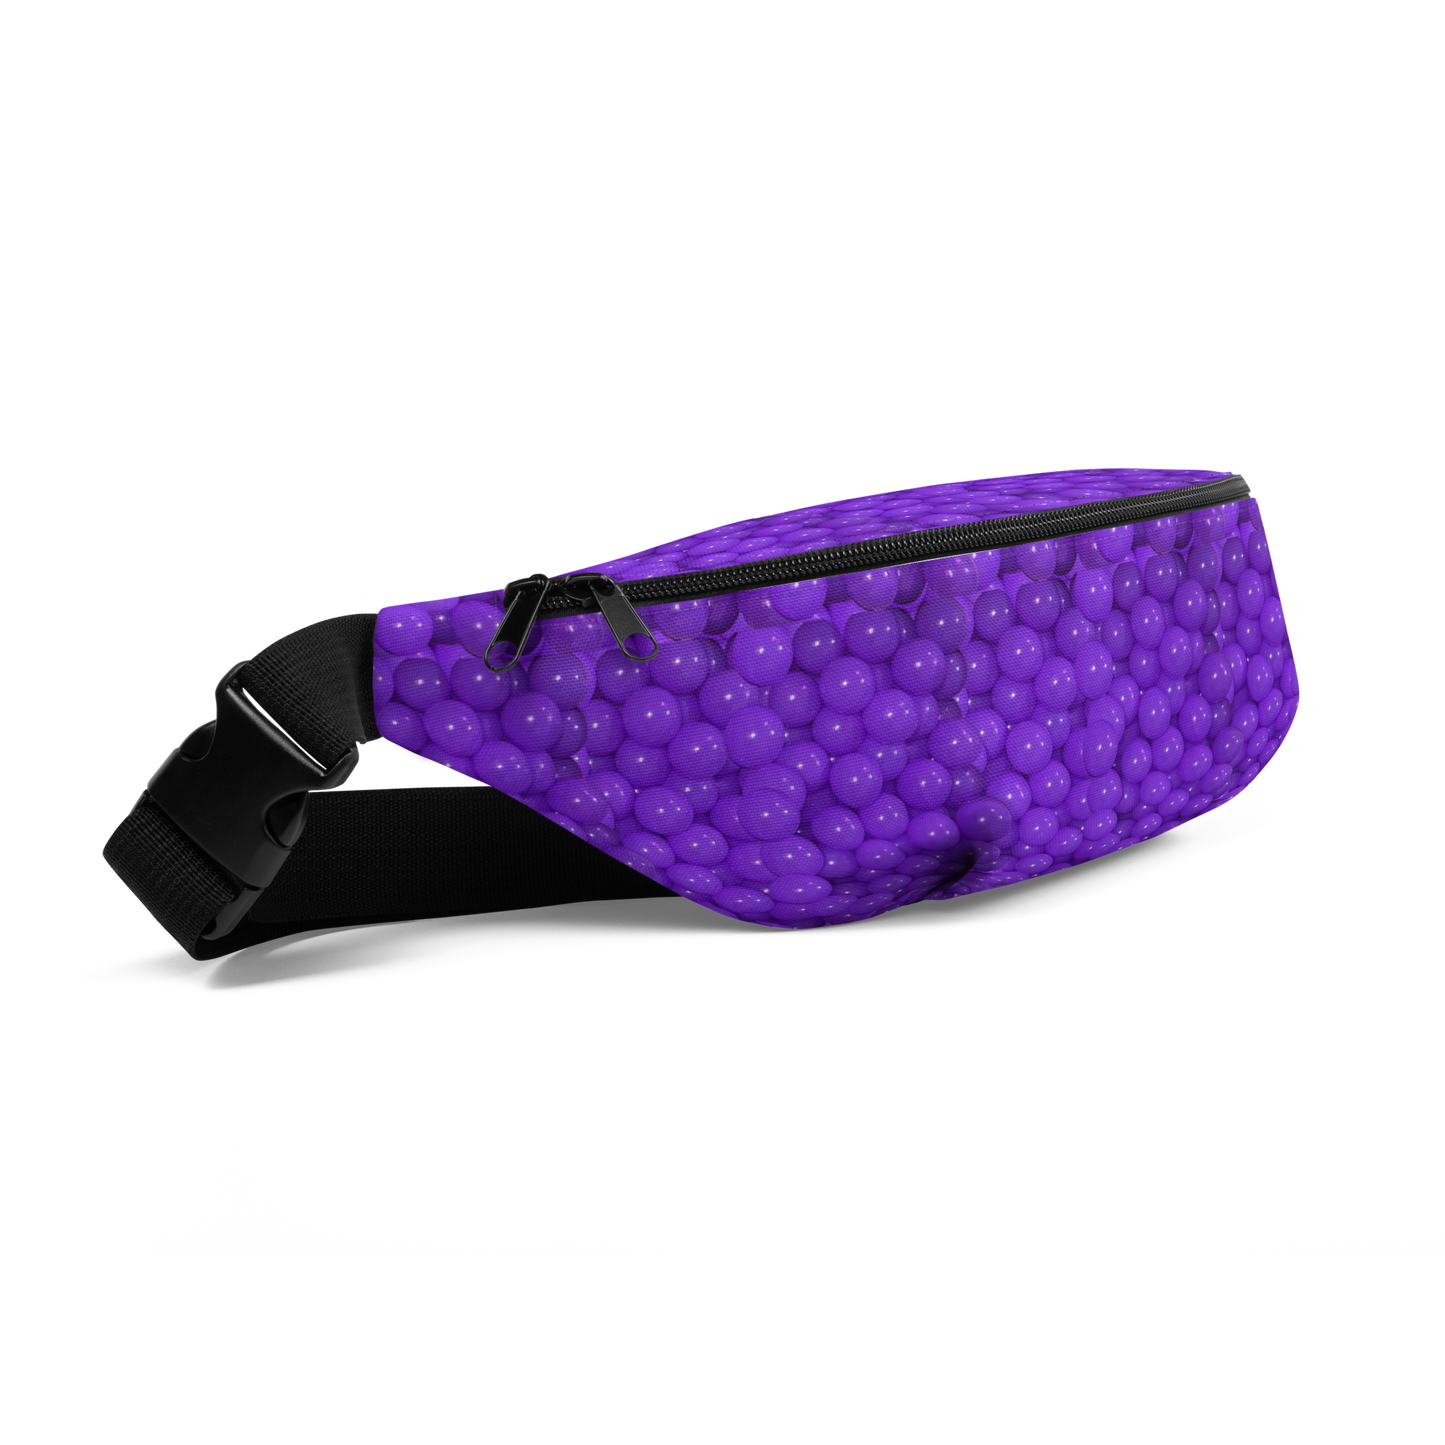 Ball Pit in Purple Fanny Pack